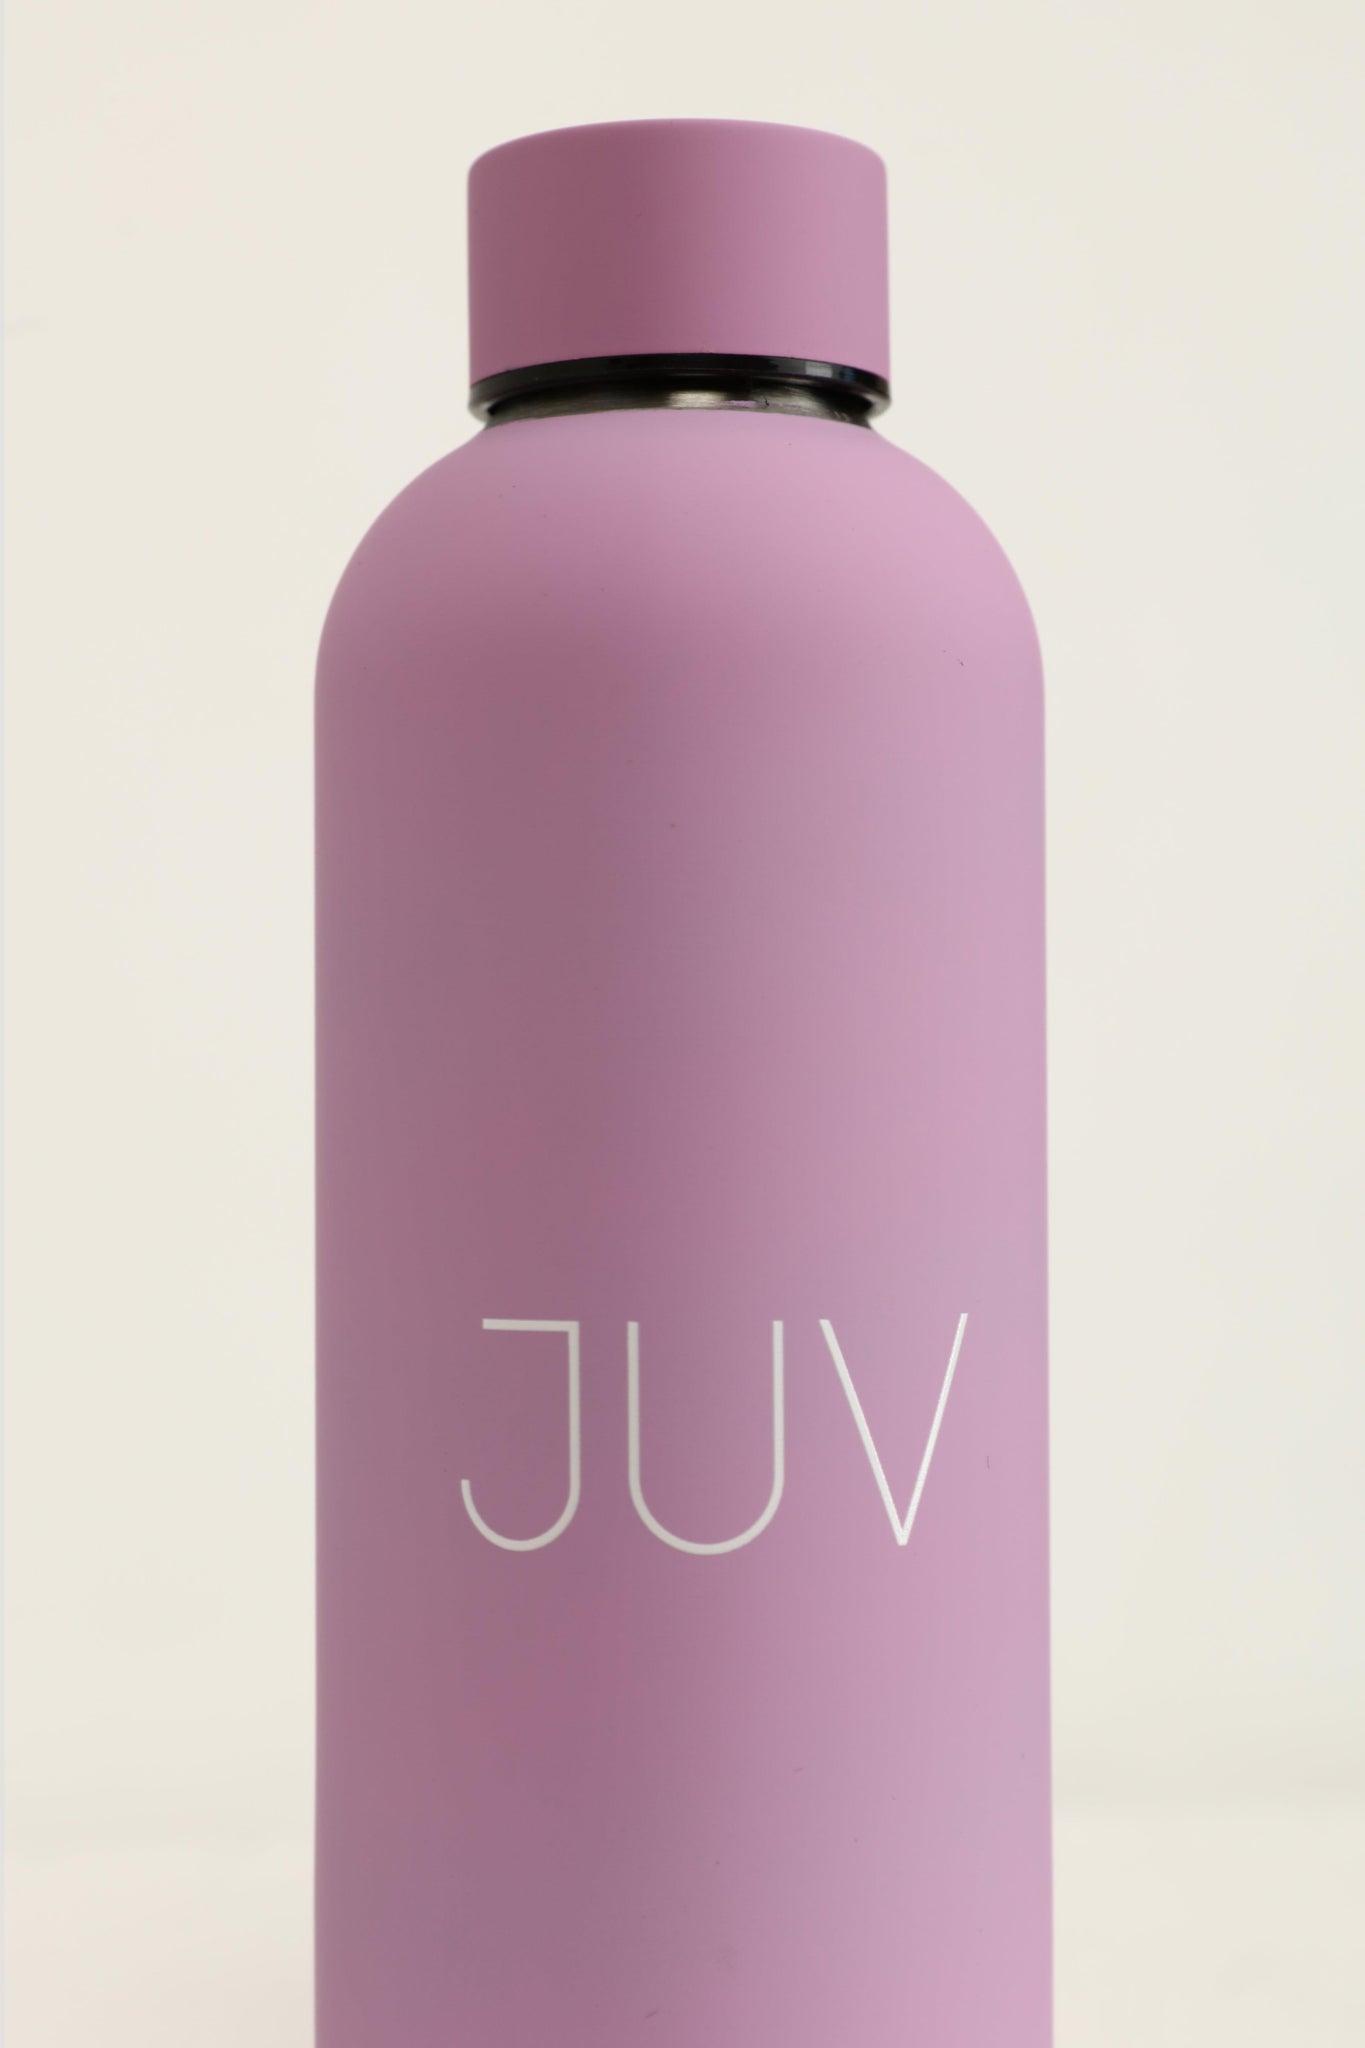 JUV mia thermal bottle in purple, close up front view.